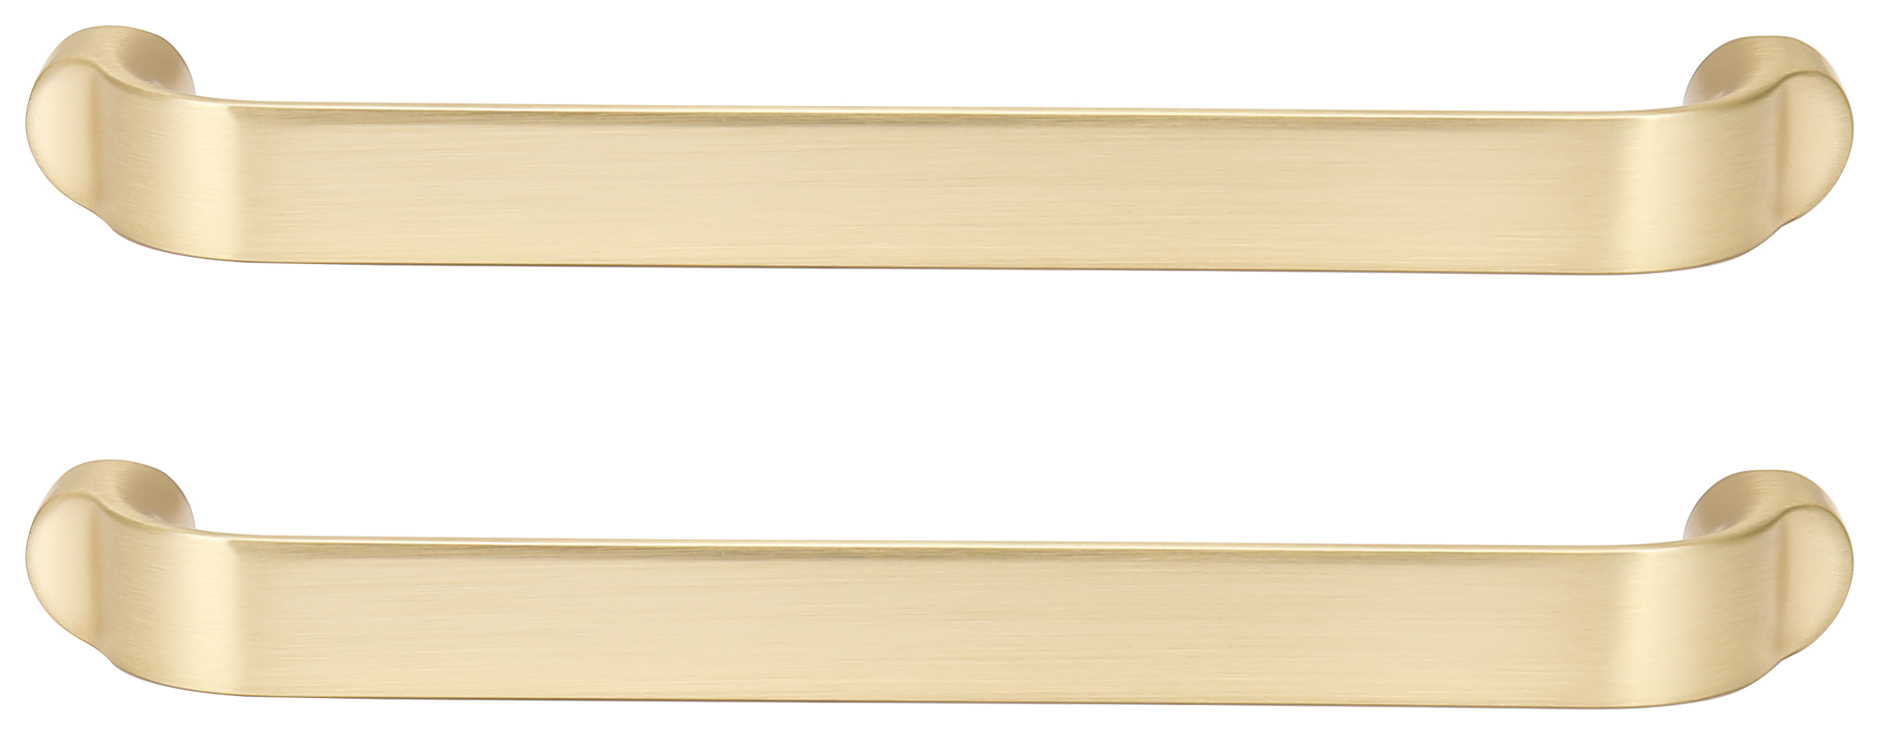 Straight Cabinet Handle Satin Brass 140mm - Pack